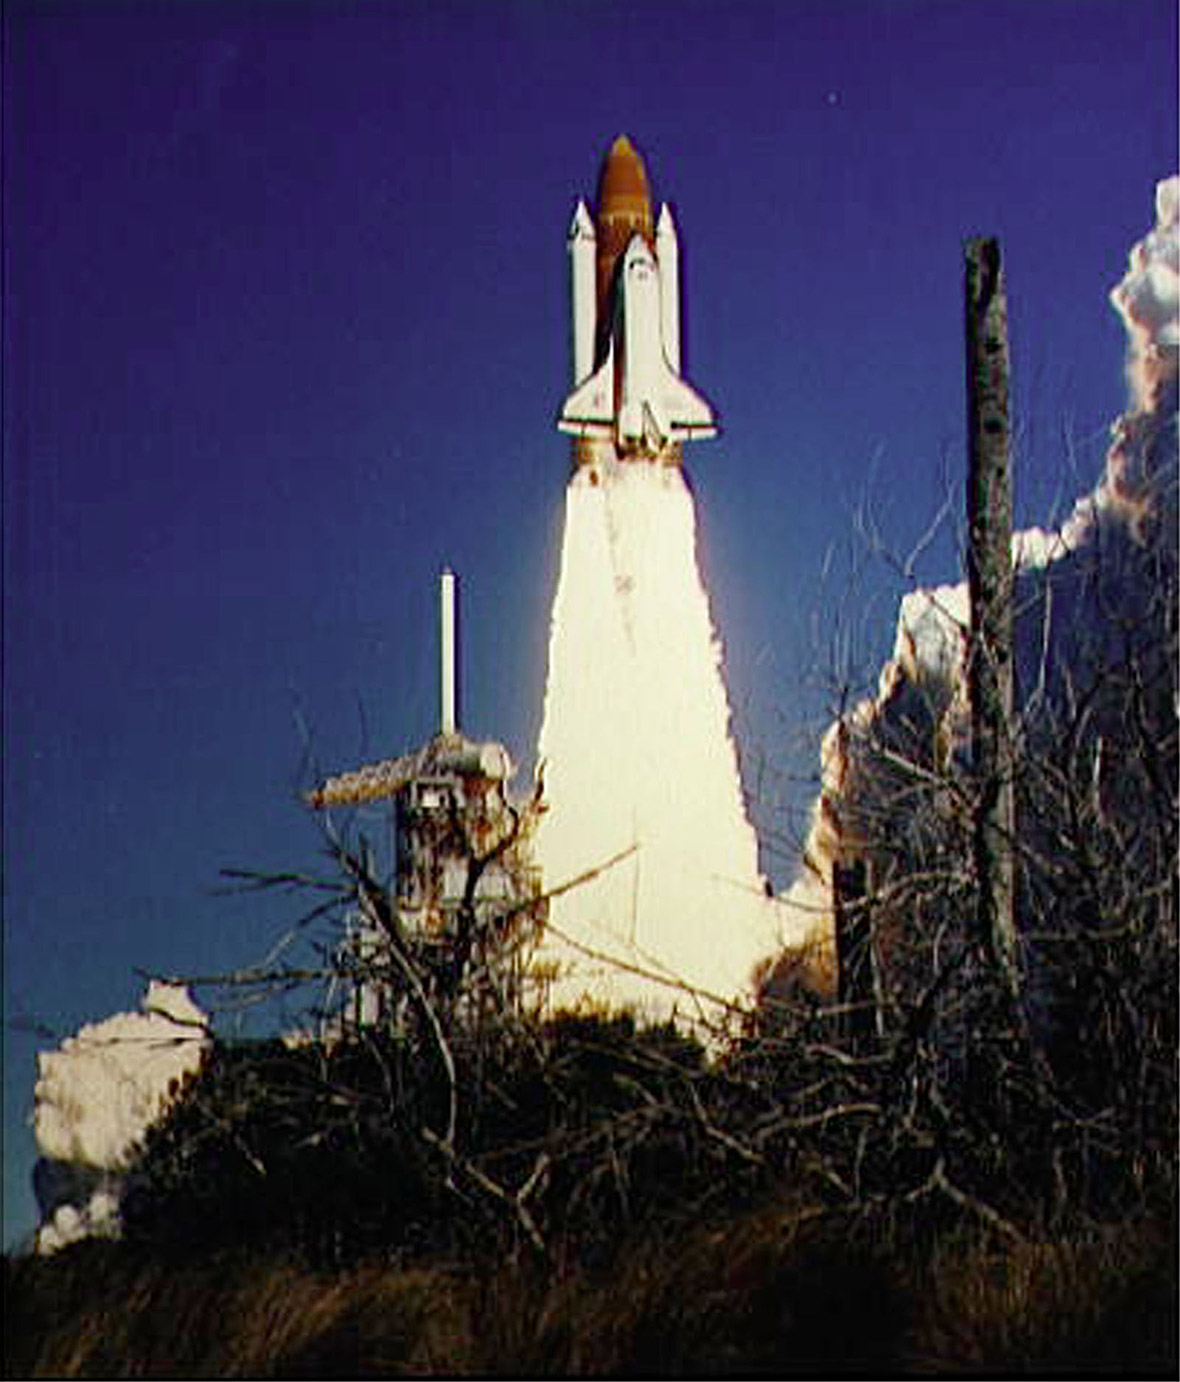 Nasa Space Shuttle Challenger disaster: Remembering the tragedy on its 30th anniversary